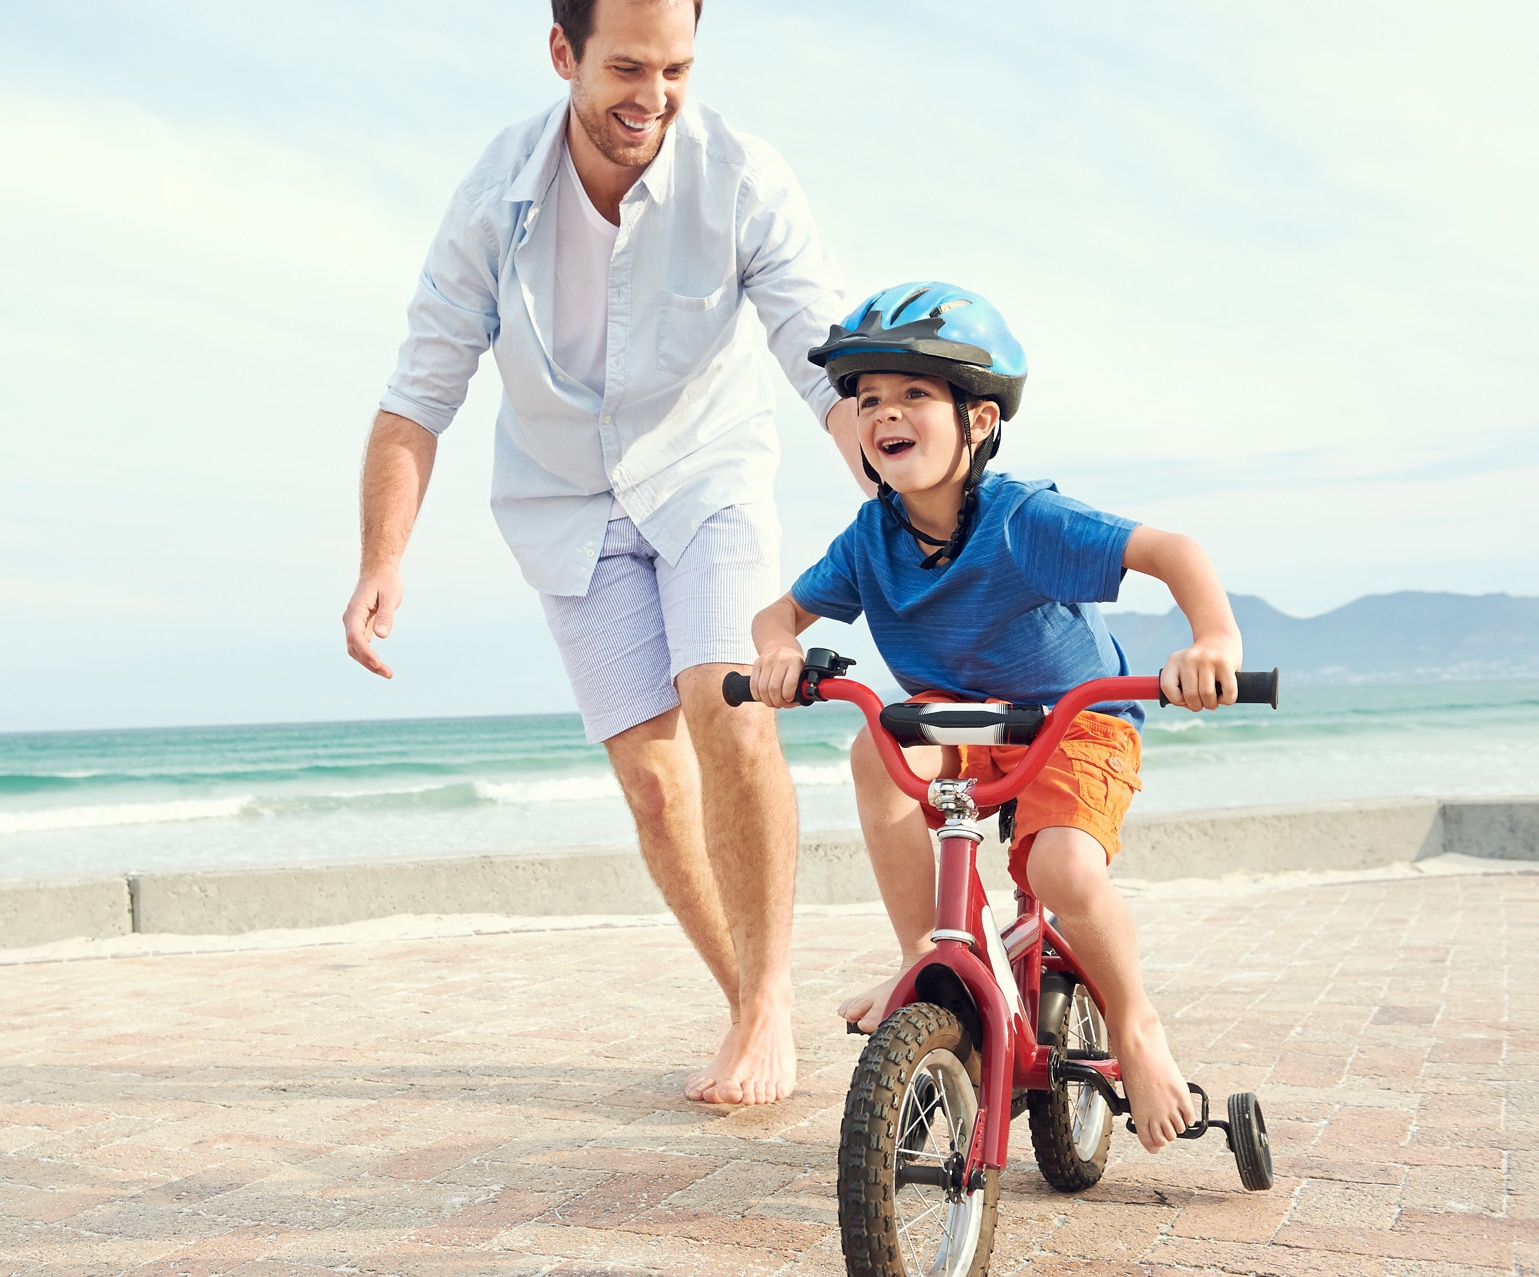 Father and son learning to ride a bicycle at the beach having fun together; Shutterstock ID 170208299; purchase_order: -; job: -; client: -; other: -